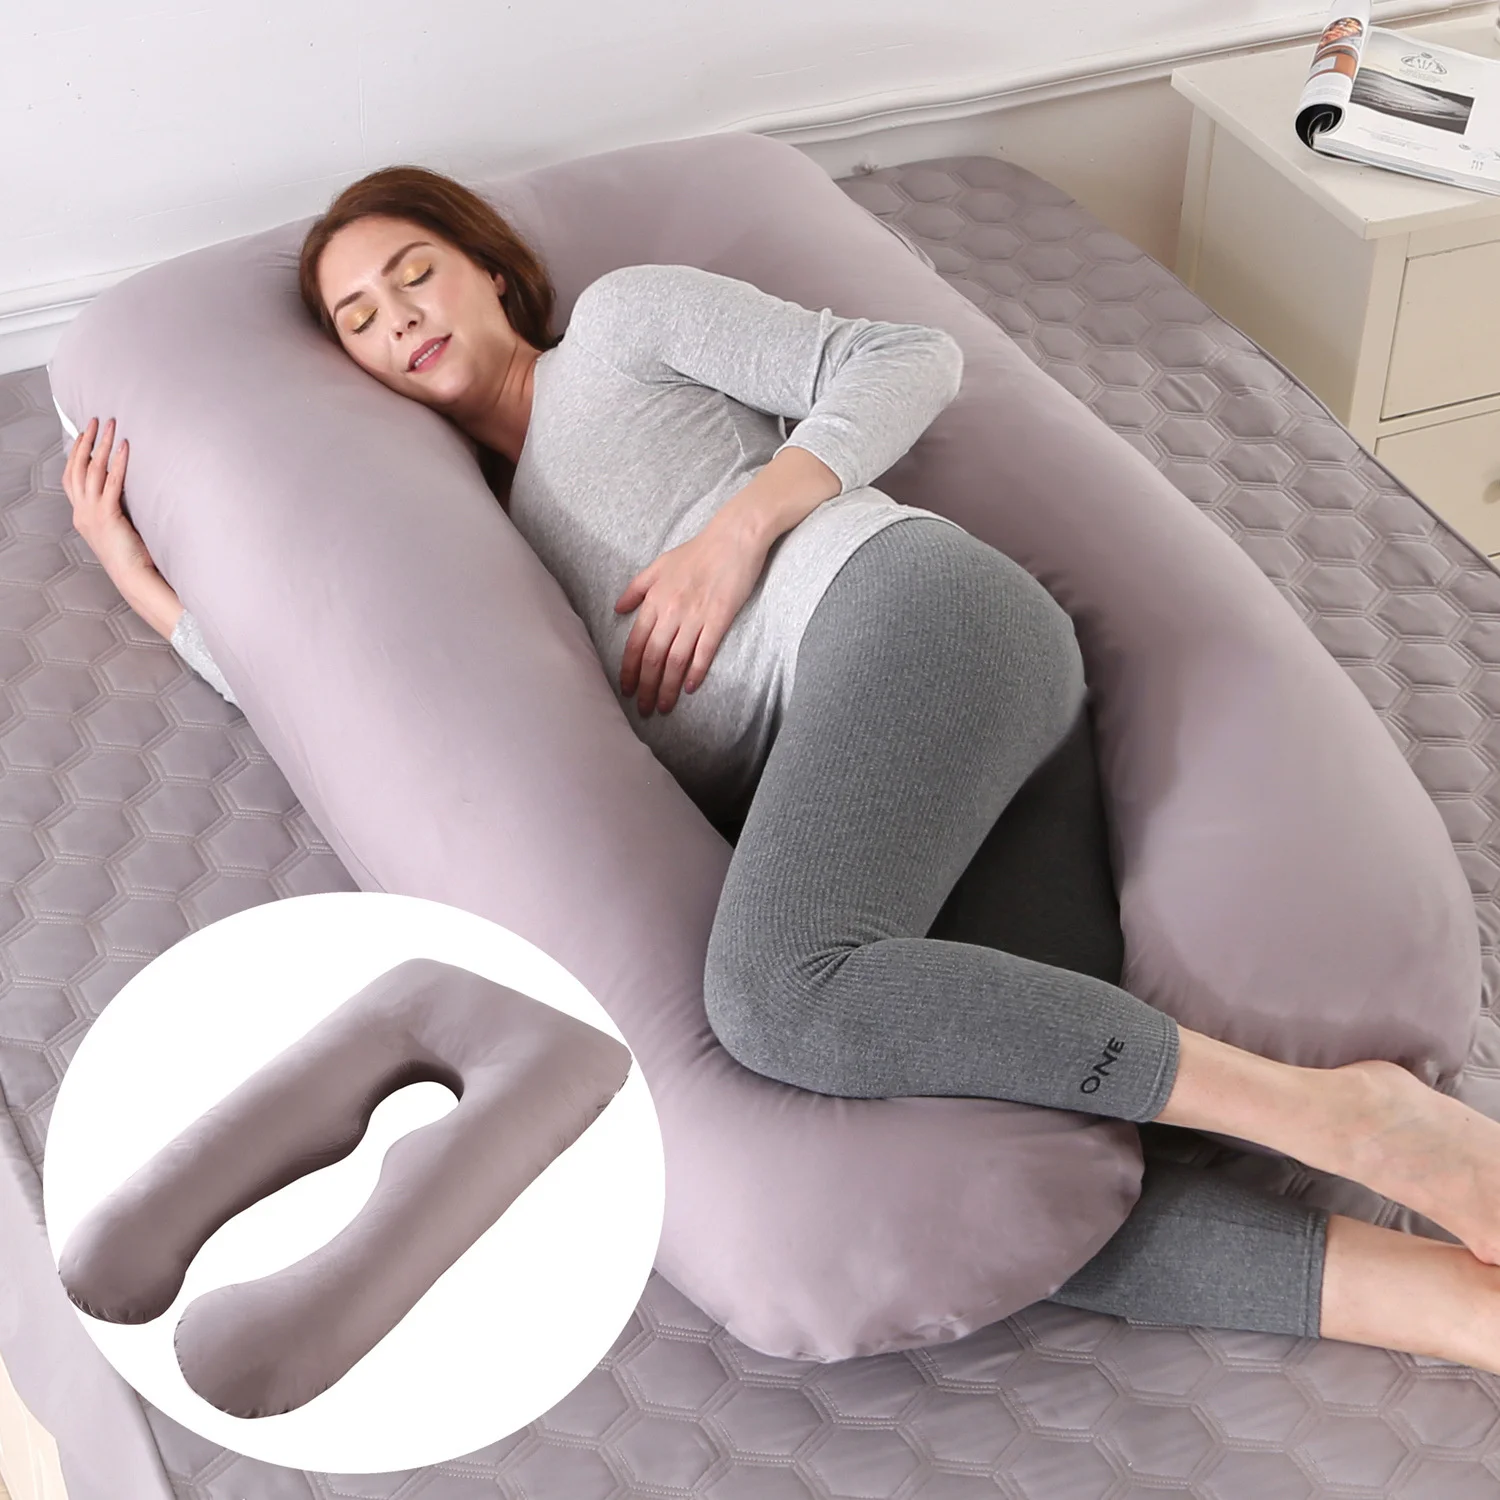 2022 70x130CM New Full Body Nursing Pregnancy Pillow U-Shaped Maternity For Sleeping With Removable Cotton Cover